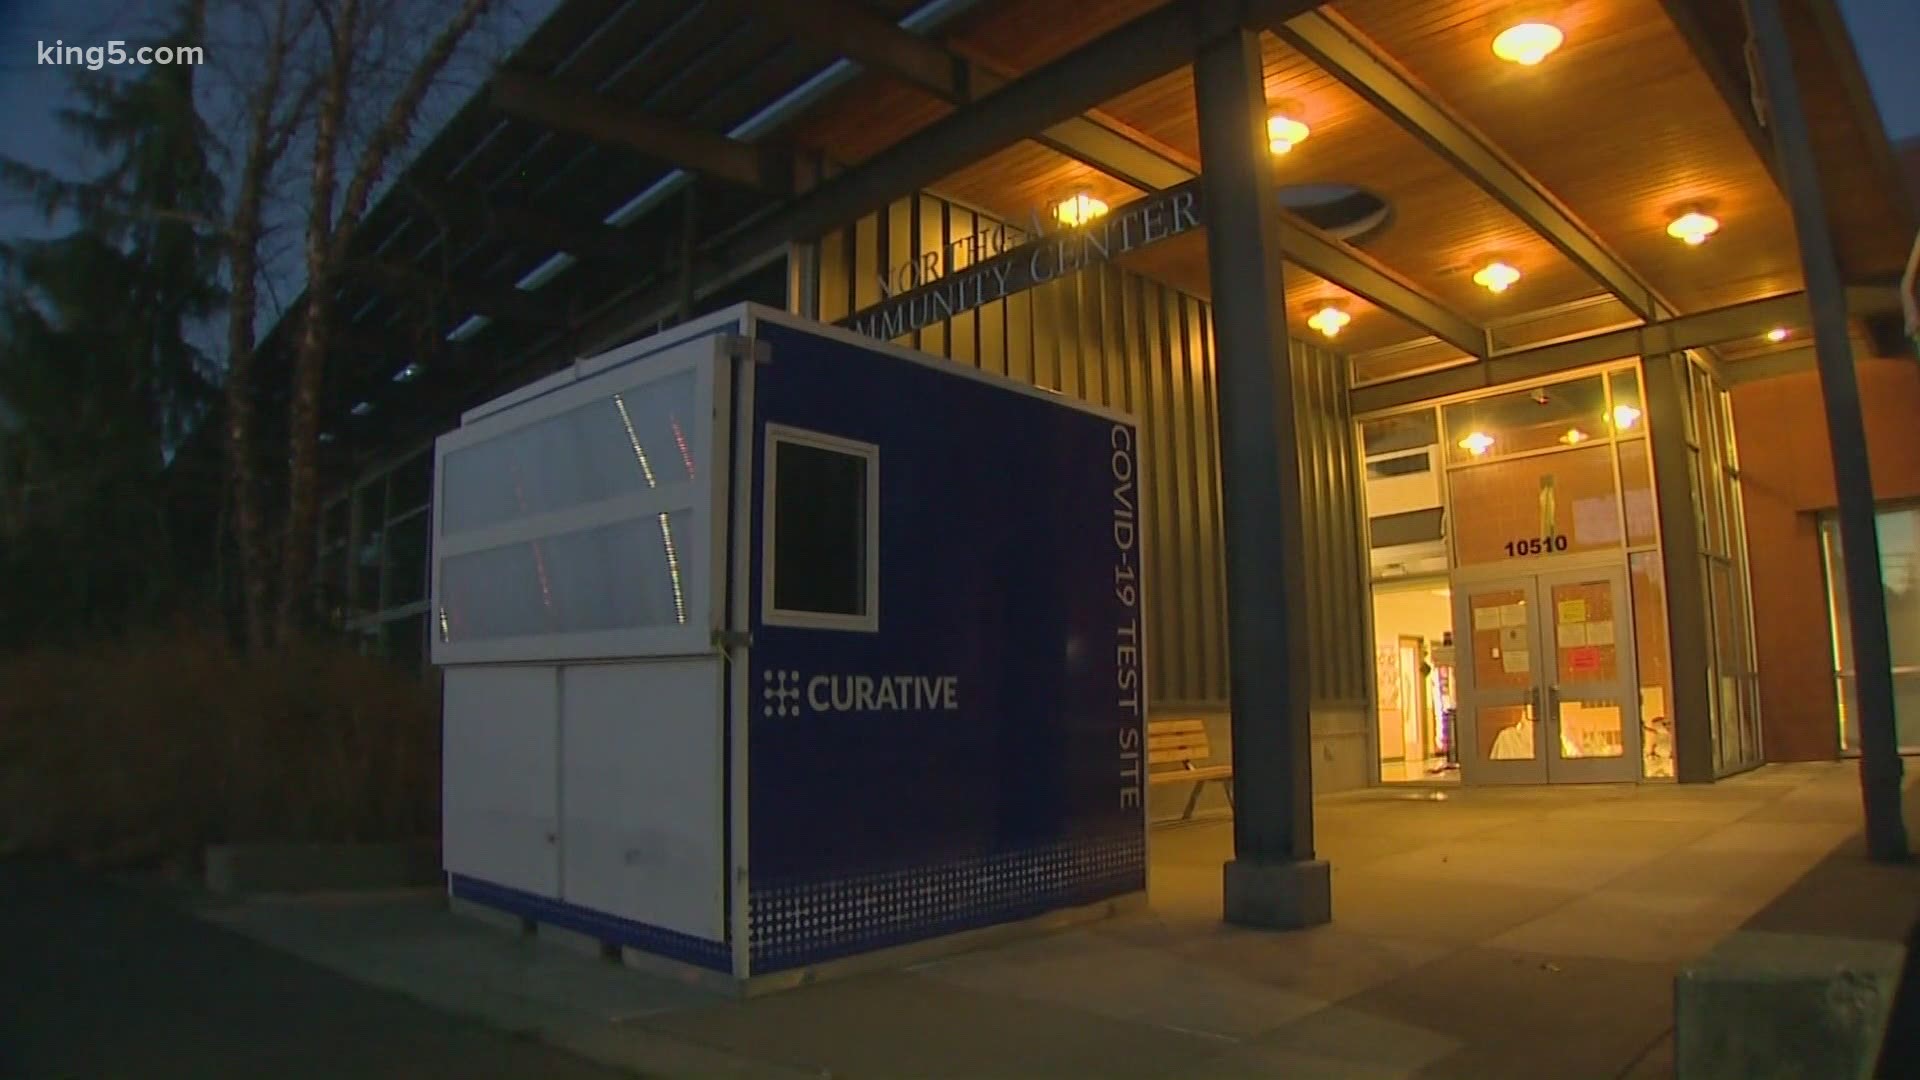 A pilot program in Seattle implements two walk-up kiosks in Northgate and the Central District where people can get tested for COVID-19 using an oral swab.